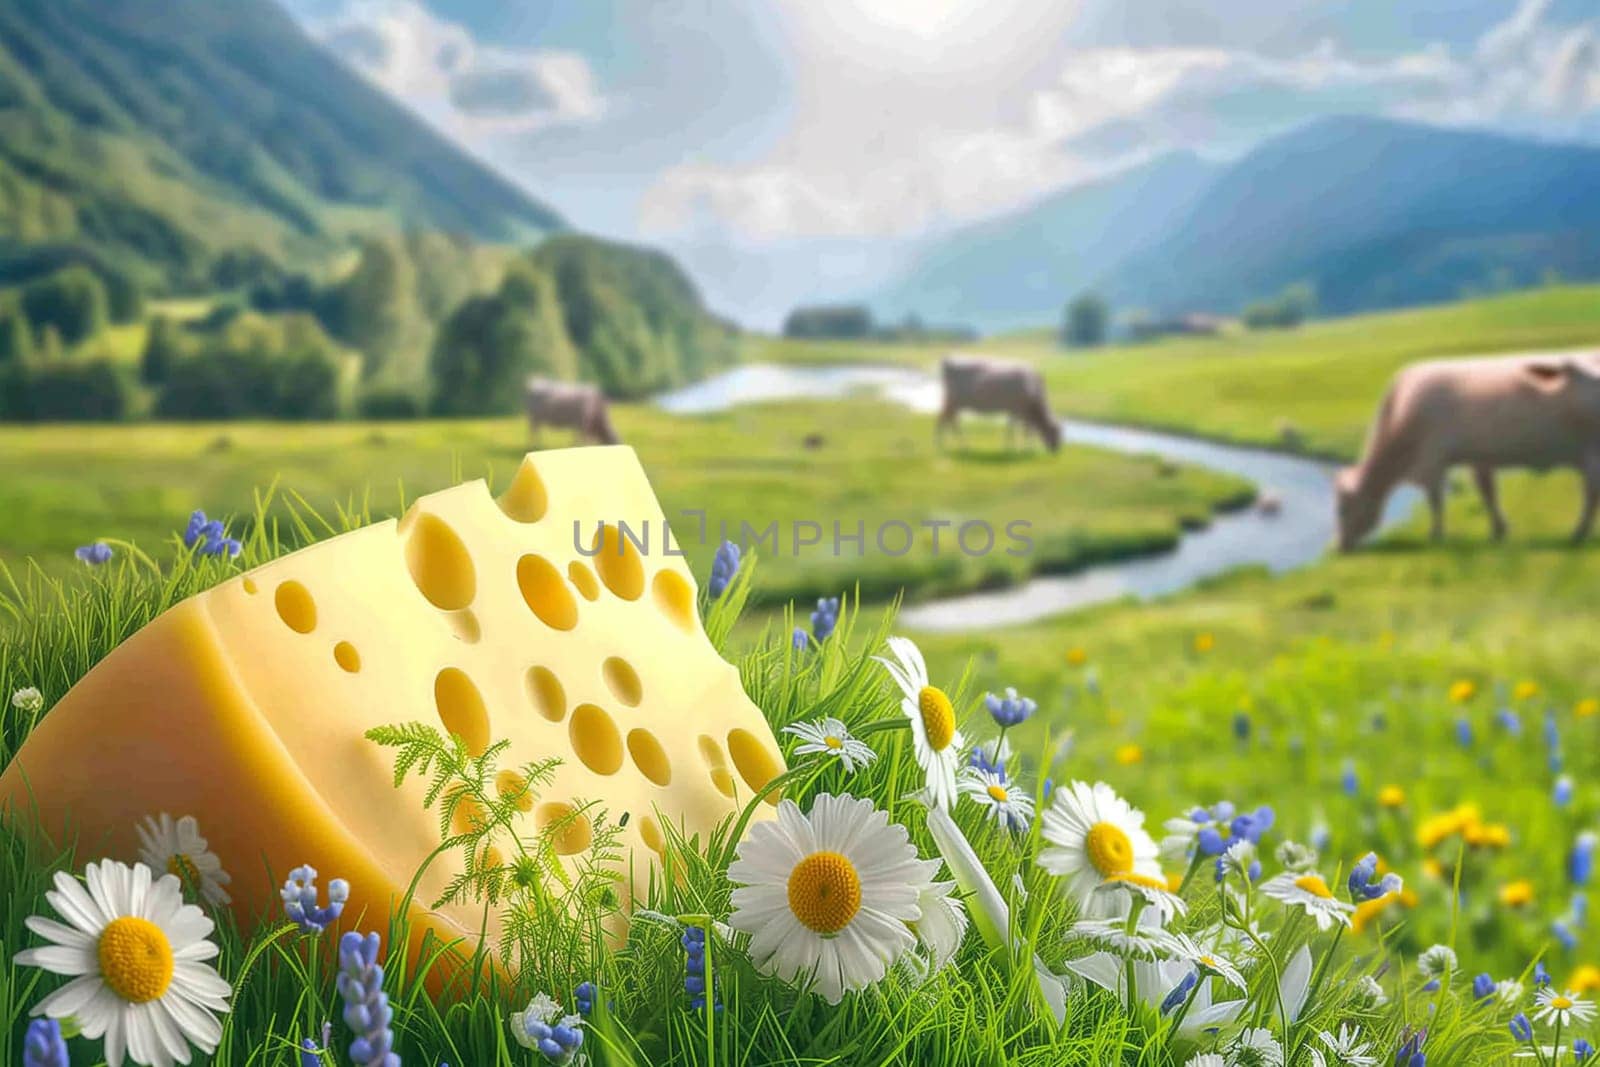 A piece of cheese lying in the grass, surrounded by green blades and small insects crawling around it.